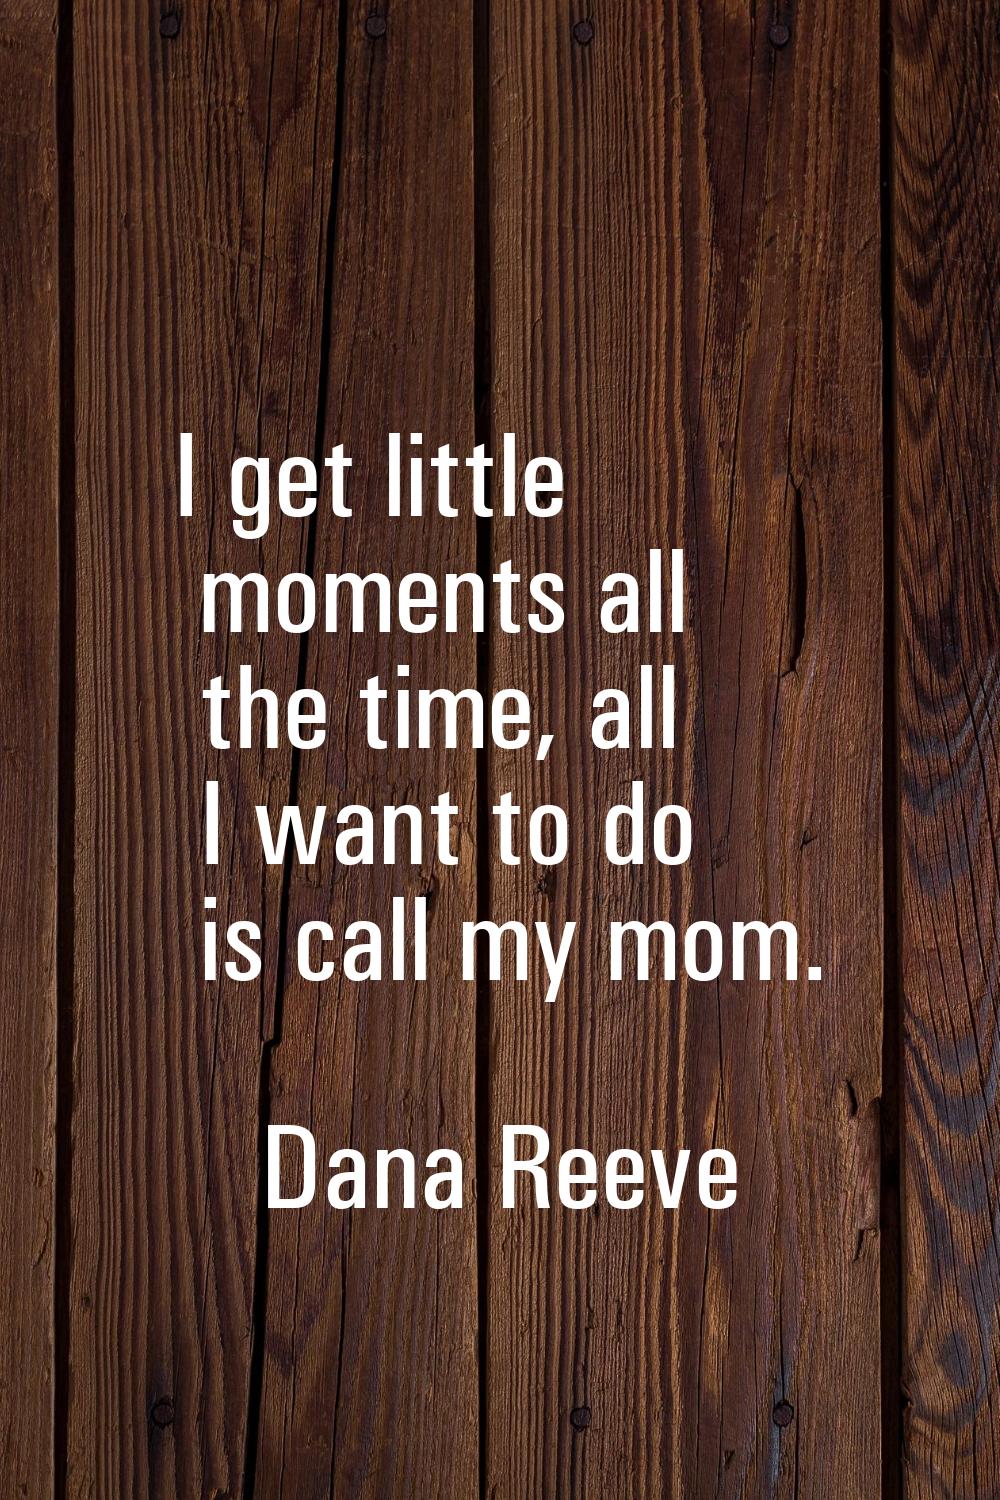 I get little moments all the time, all I want to do is call my mom.